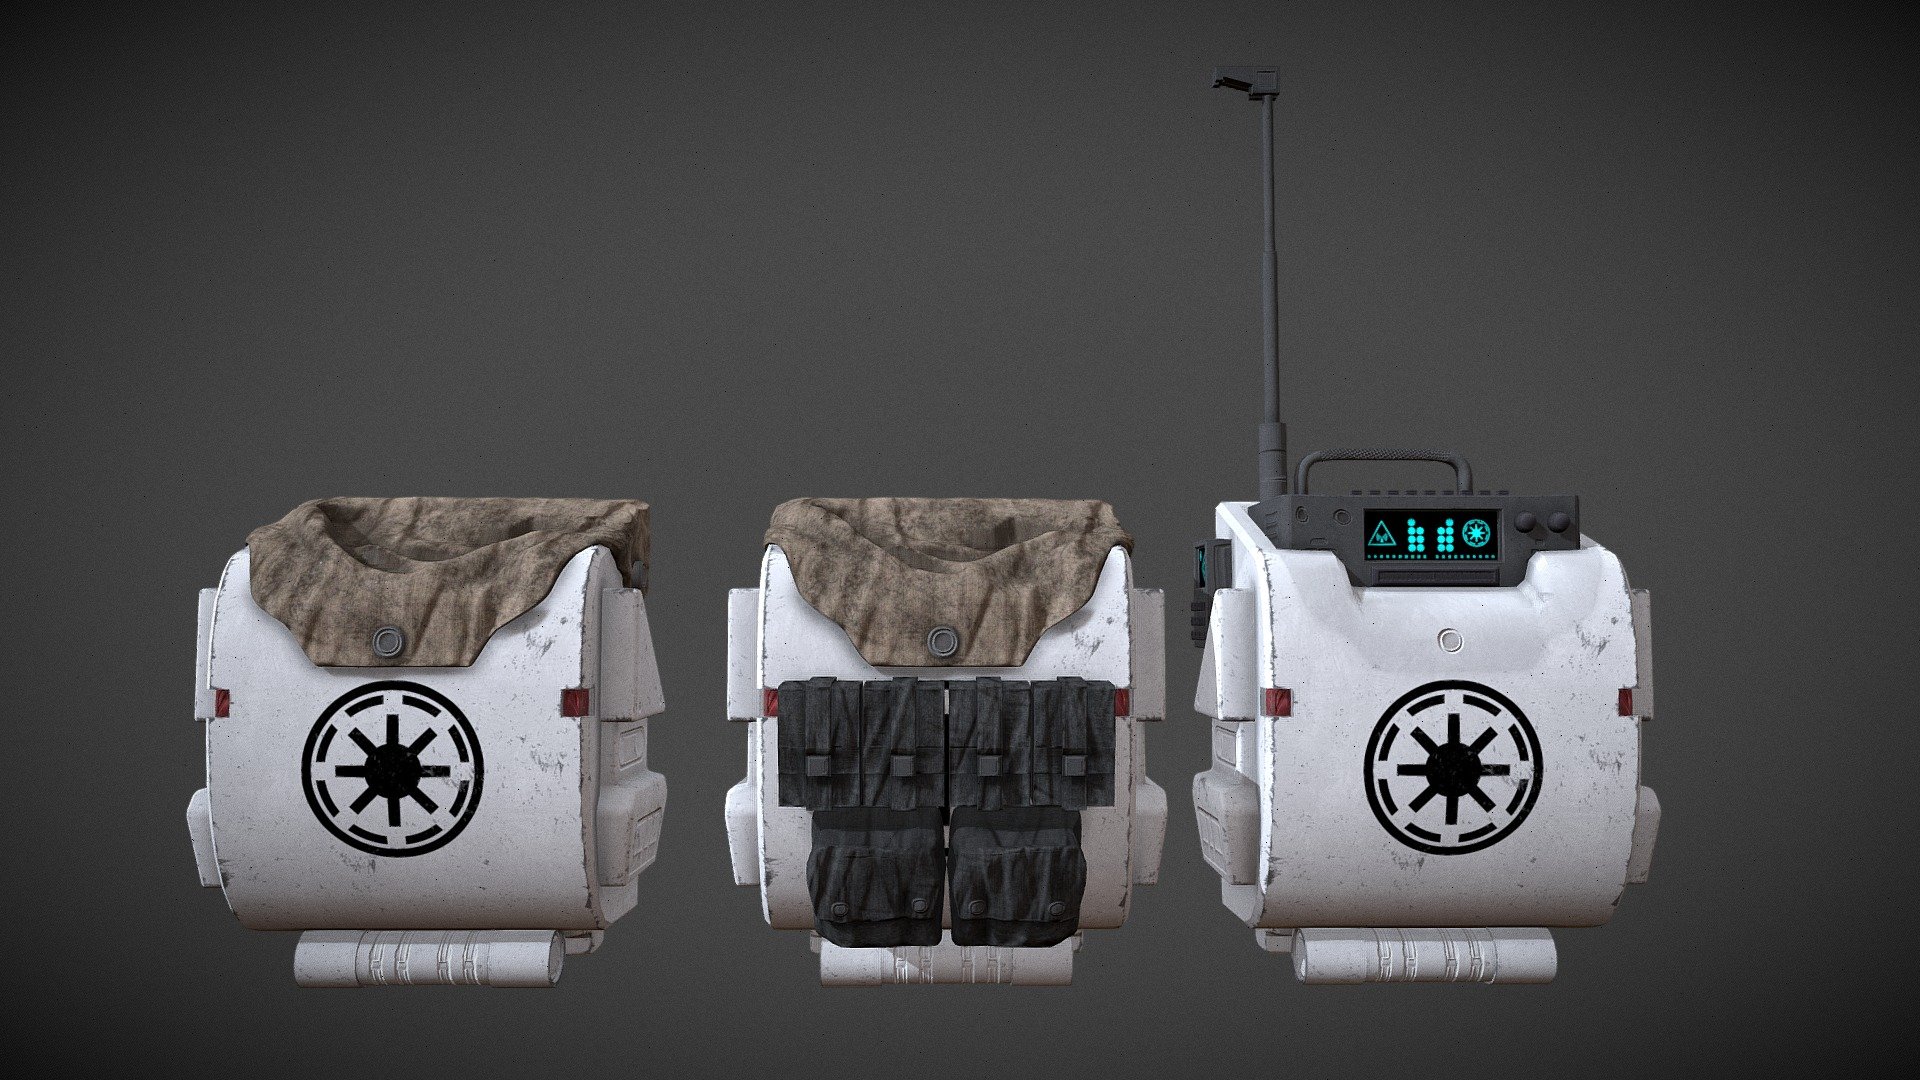 Phase II Clone Trooper Backpacks from Star Wars based off references from Battlefront II and Revenge of the Sith - Armor Model/Texture work by Outworld Studios

Must give credit to Outworld Studios if using this asset

Show support by joining my discord: https://discord.gg/EgWSkp8Cxn

Portoflio: https://www.artstation.com/artwork/DvvZZ9 - Phase II Clone Trooper Backpacks - Star Wars - Buy Royalty Free 3D model by Outworld Studios (@outworldstudios) 3d model